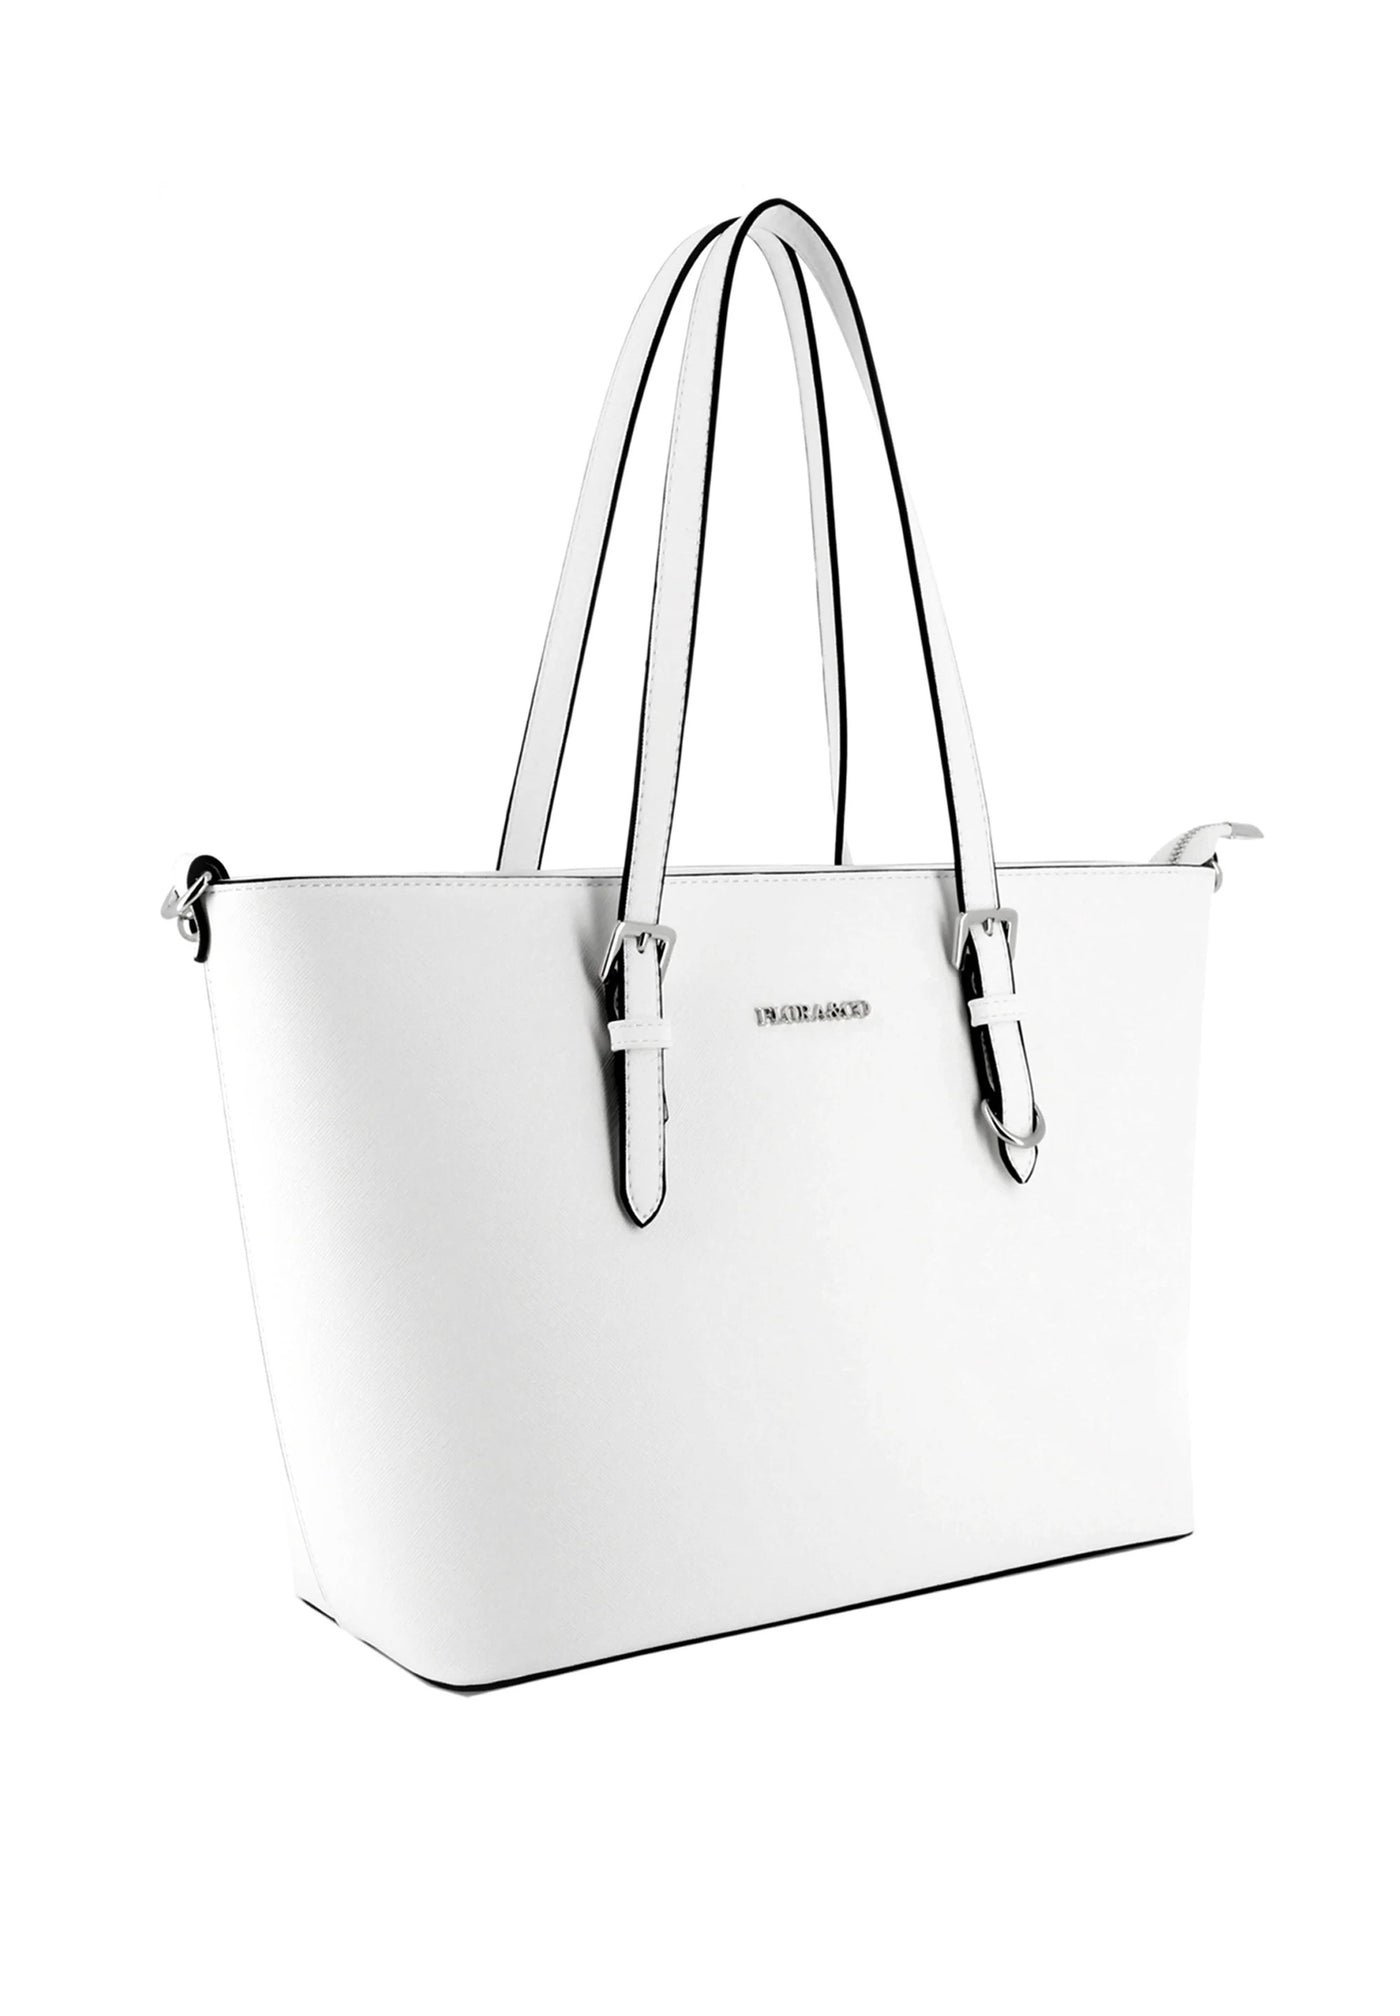 Sac cabas Flora and Co format A4 F9126 / 9126 Blanc